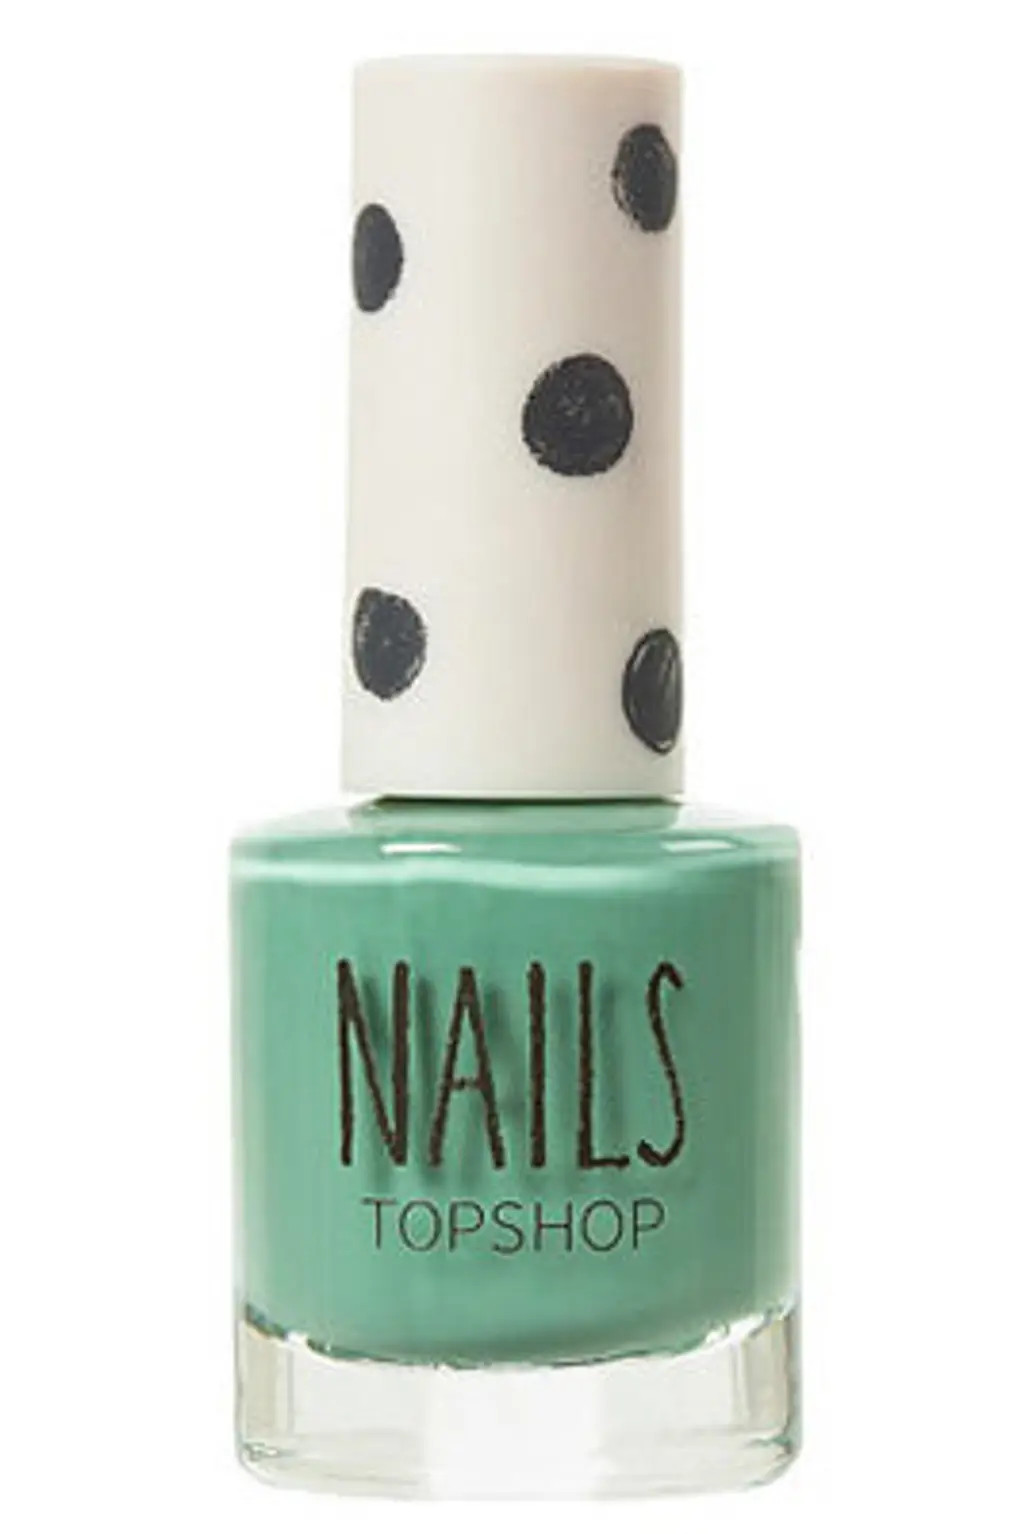 Topshop Nails in Gone Fishing